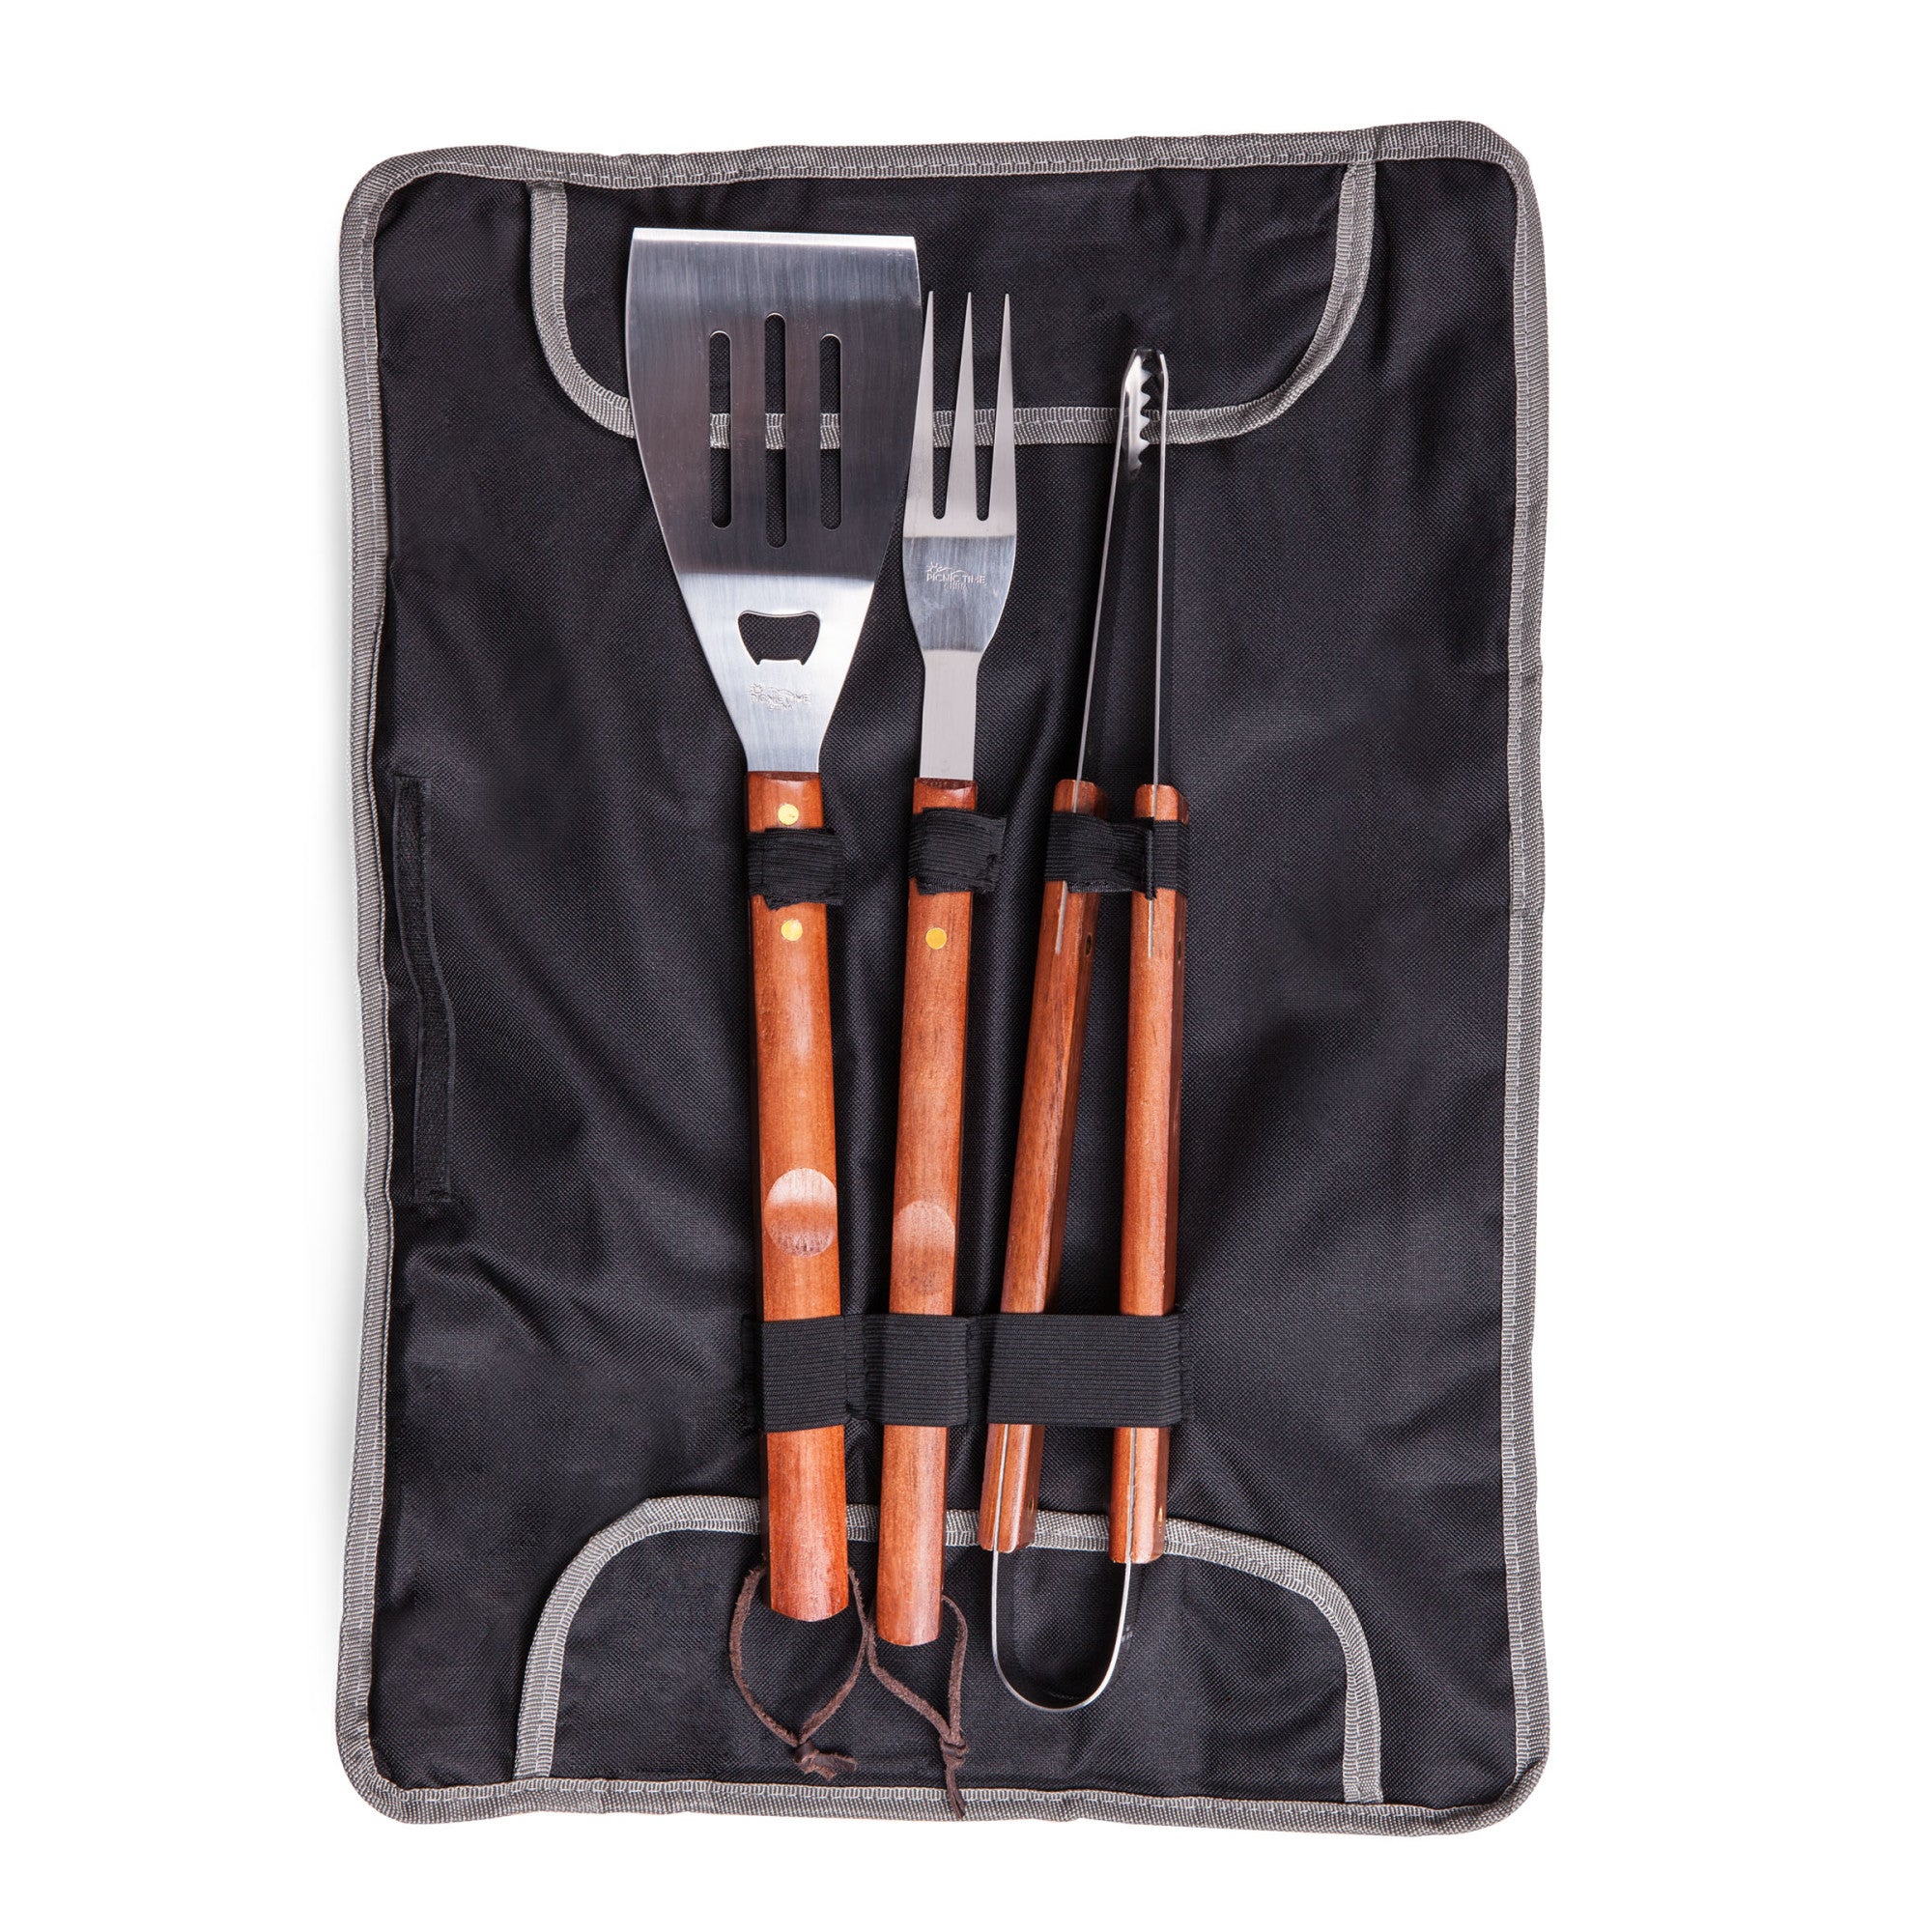 BBQ-AID 3 Piece Grill Set BBQ Accessories - Kitchen Tongs, Metal Spatula &  Fork Utensils - Heavy Duty Stainless Steel Barbecue Grill Utensils for